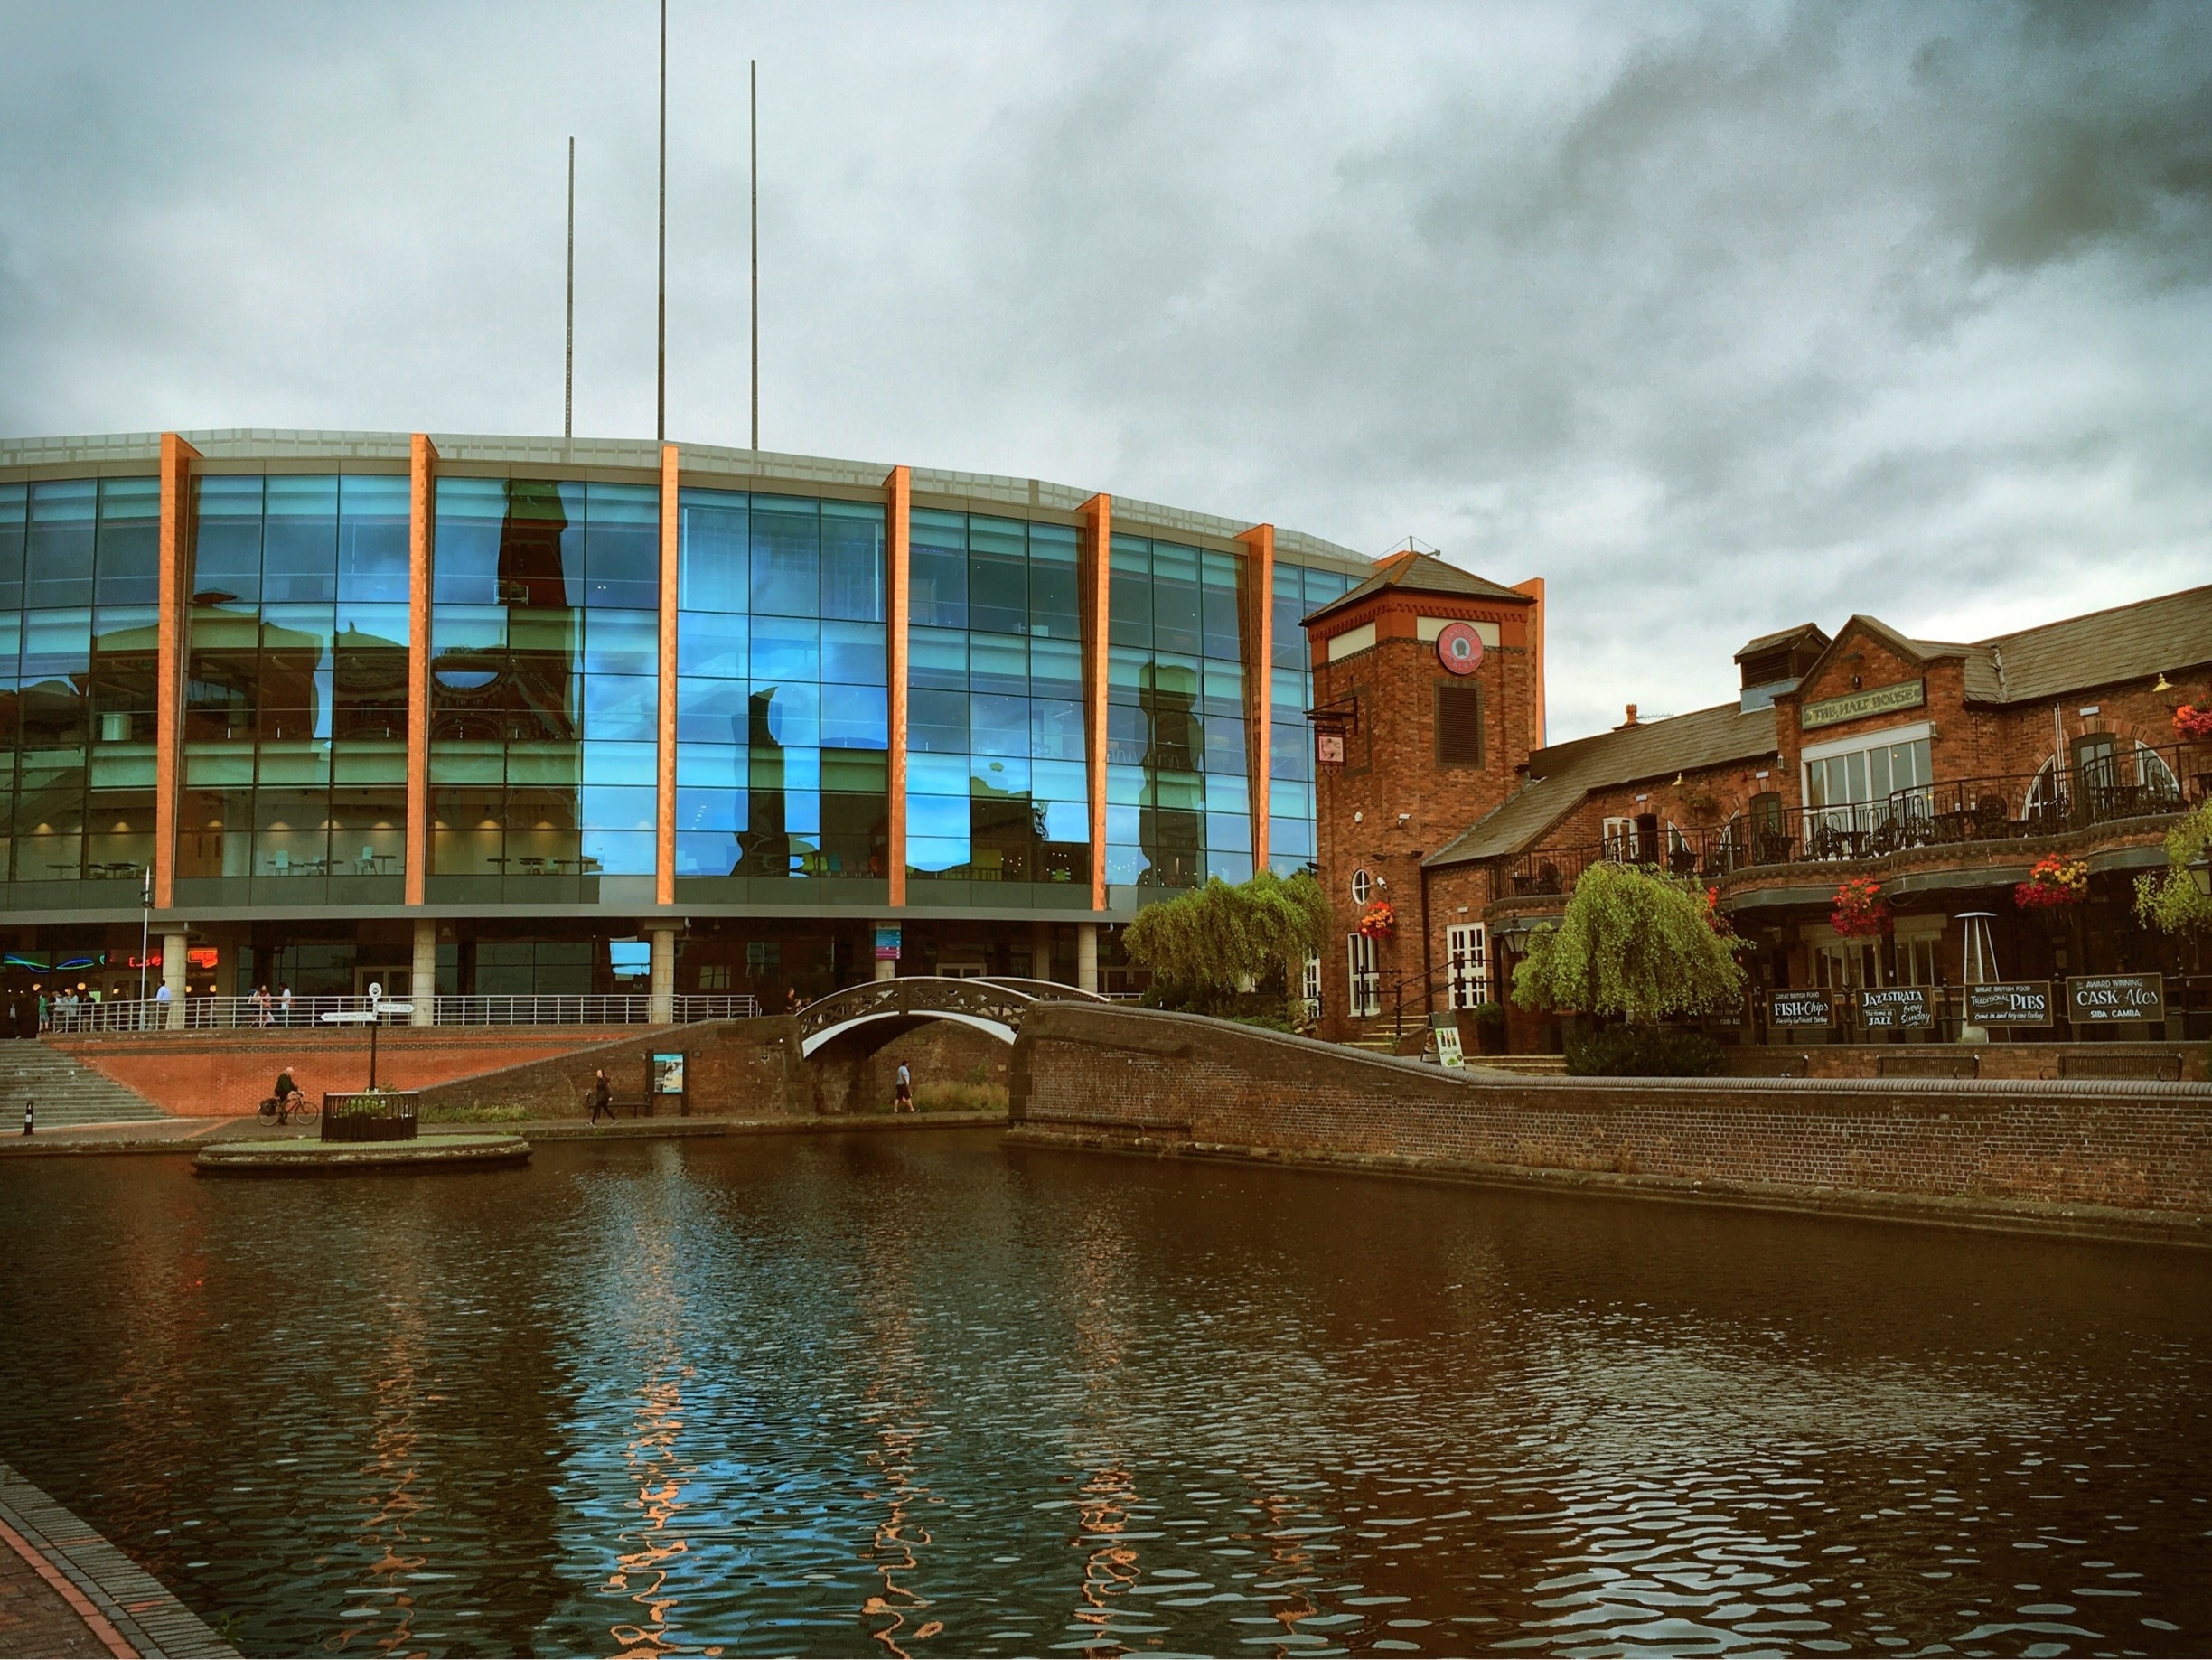 View across the canal of Barclaycard arena. Taken from the National Sea Life Centre in Birmingham.